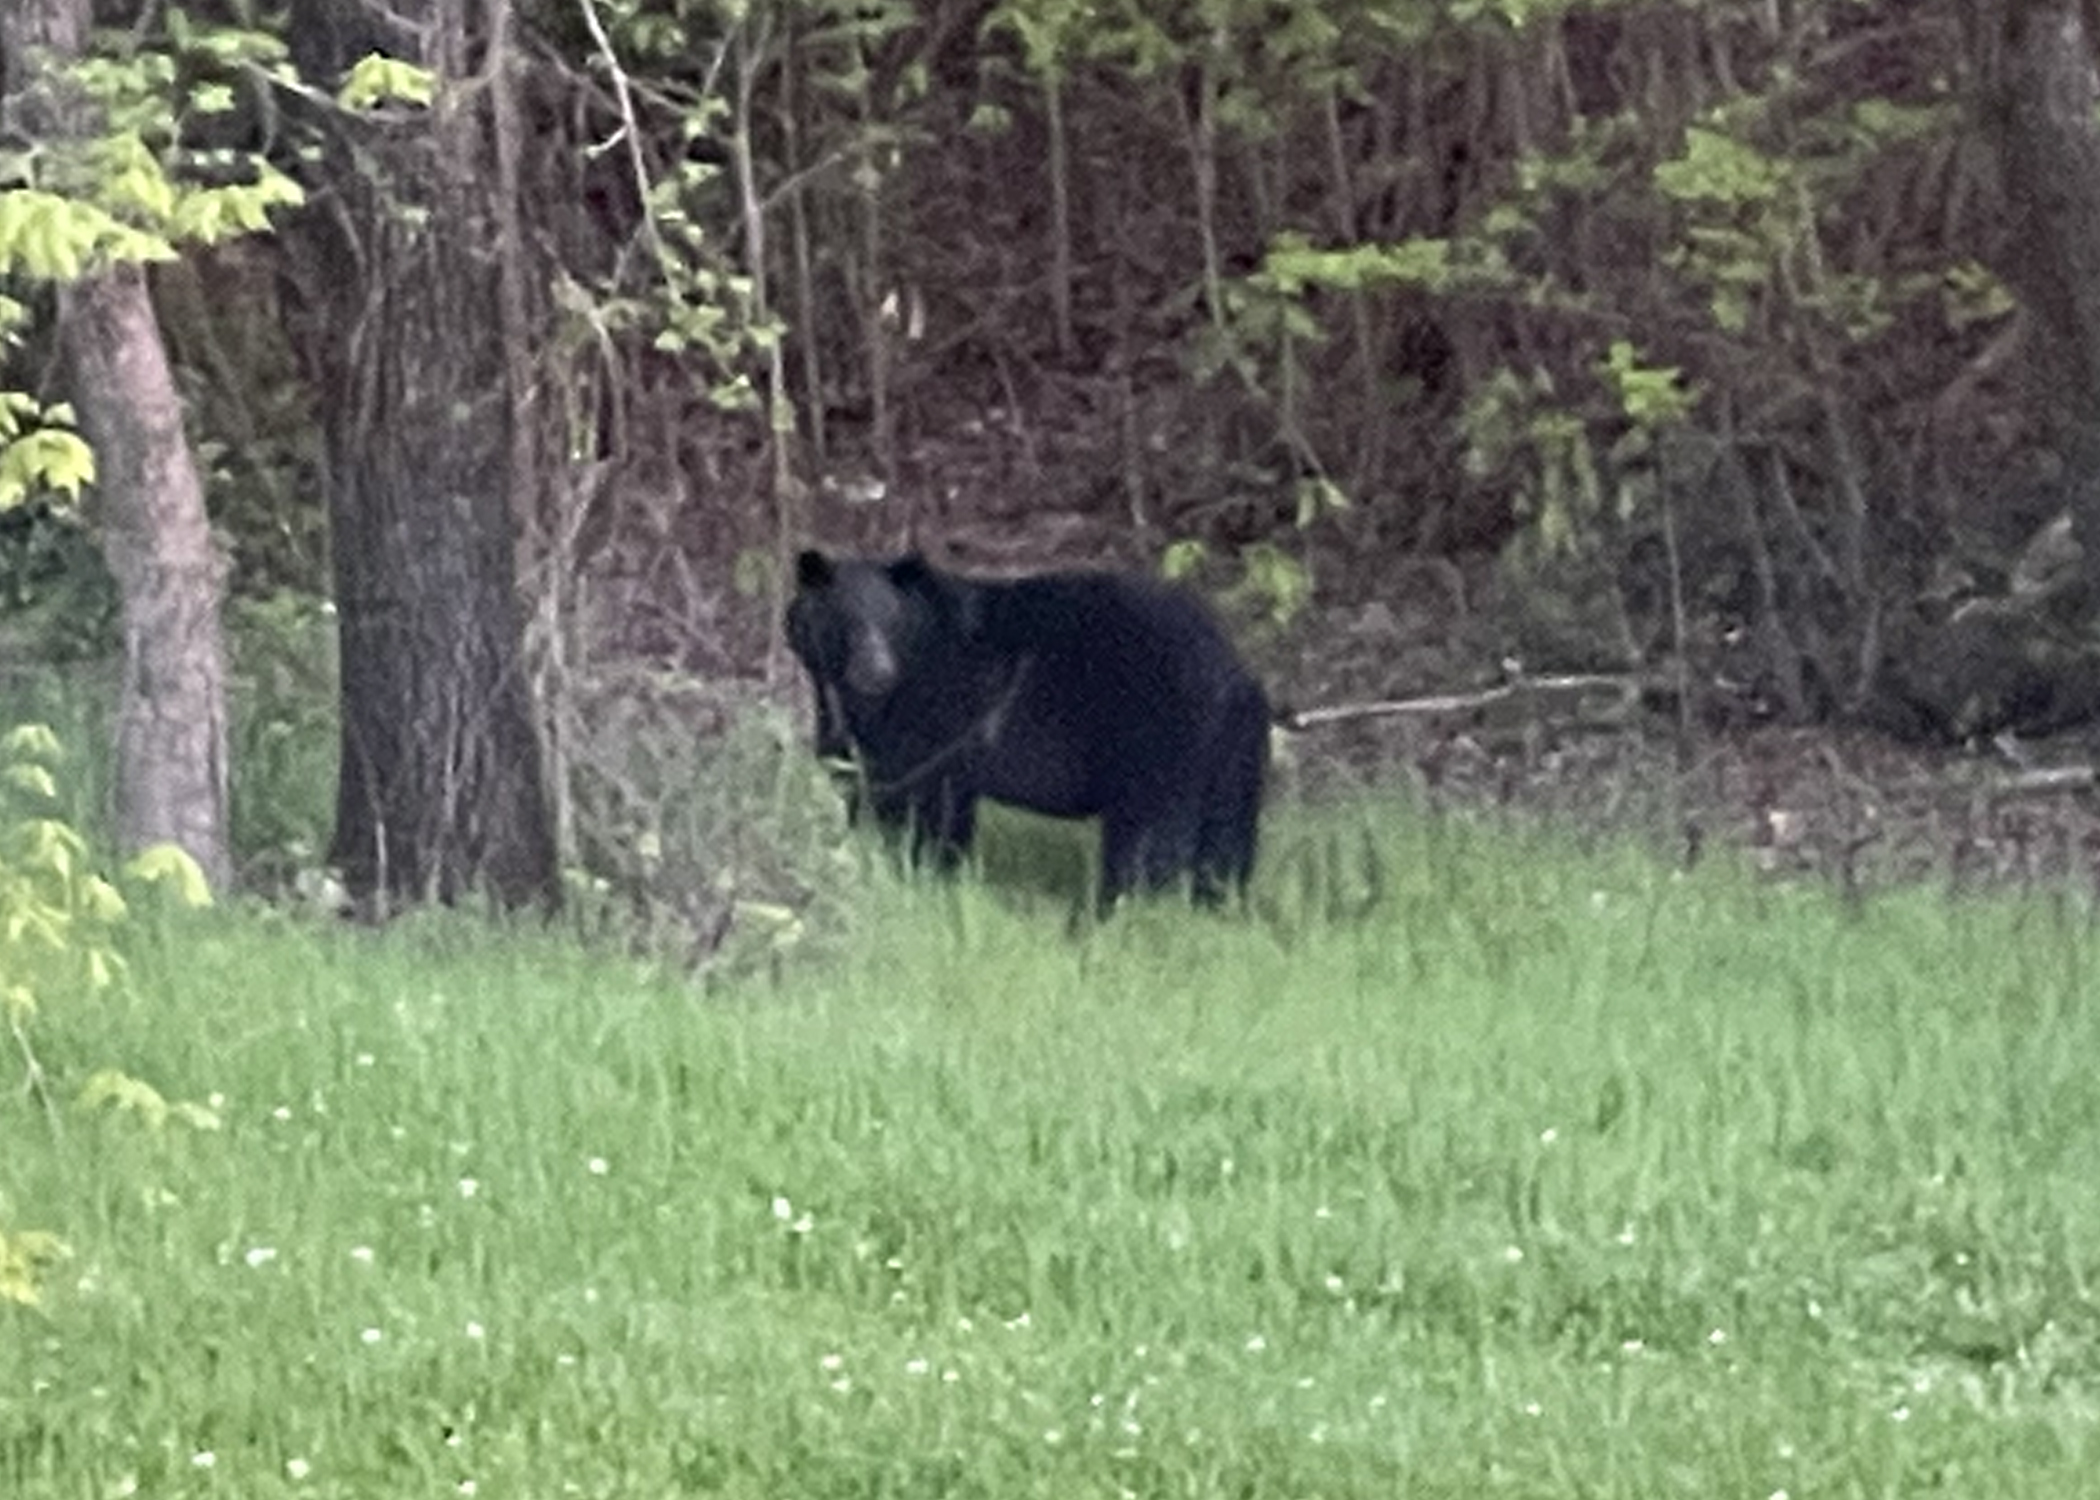 VIDEO: Another bear sighting caught on camera in Trussville